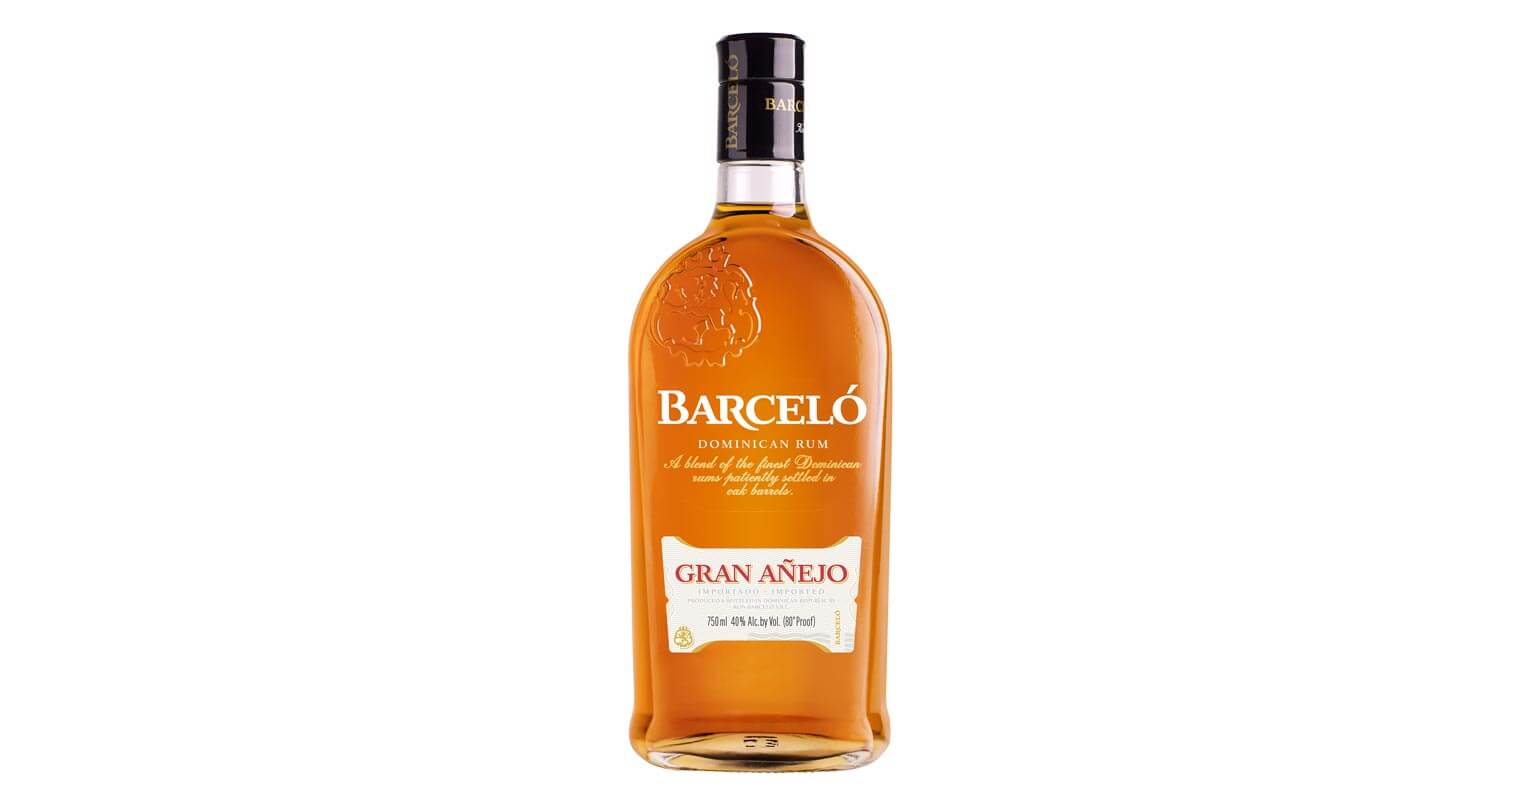 Ron Barceló Gran Añejo Rum Launches New Packaging, featured image